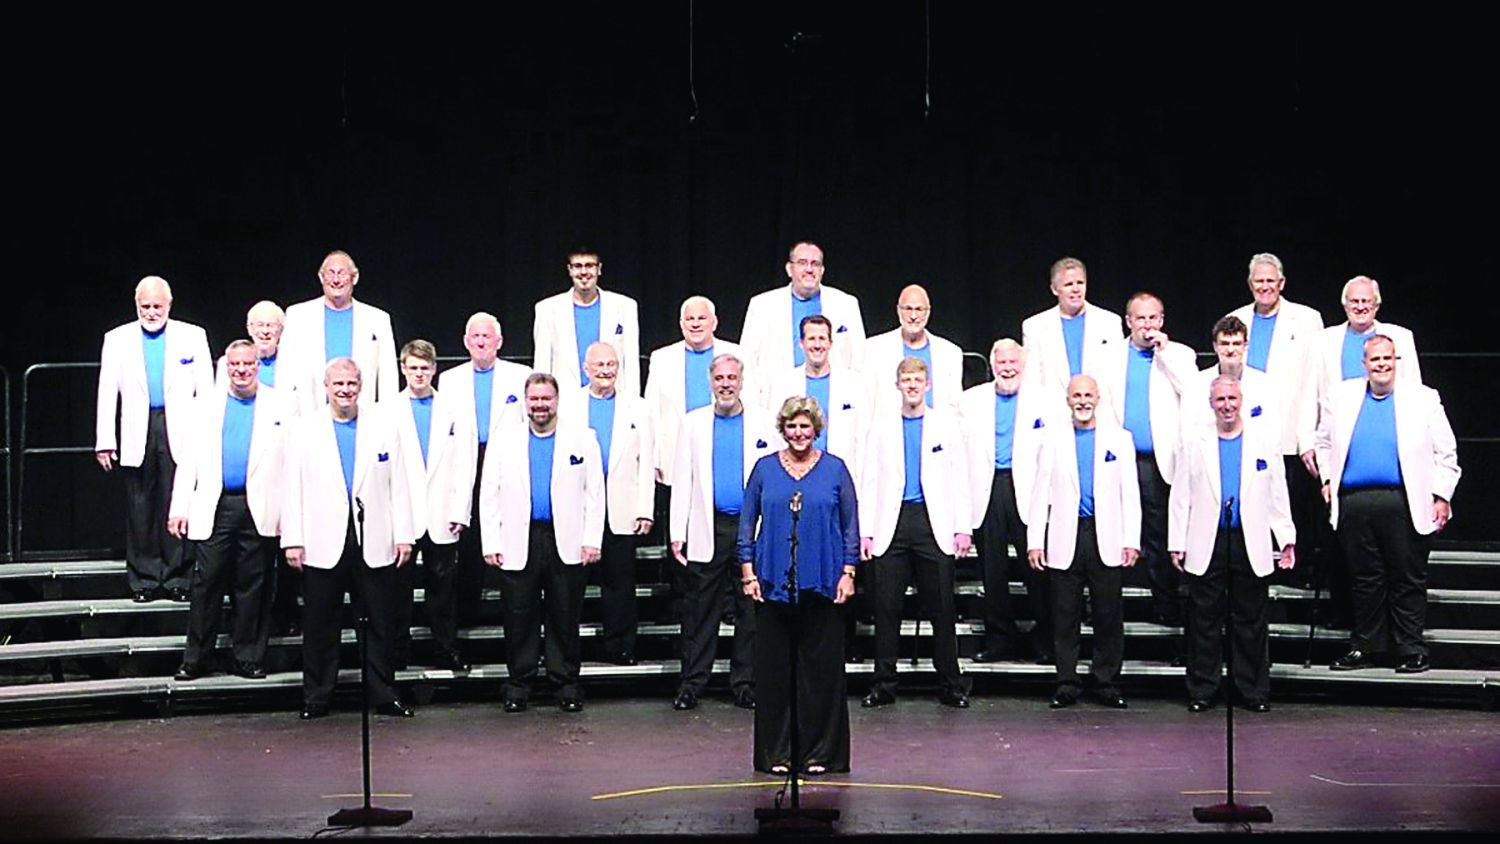 The Bucks County Country Gentlemen will perform March 24, in a benefit for the James-Lorah Memorial Home.